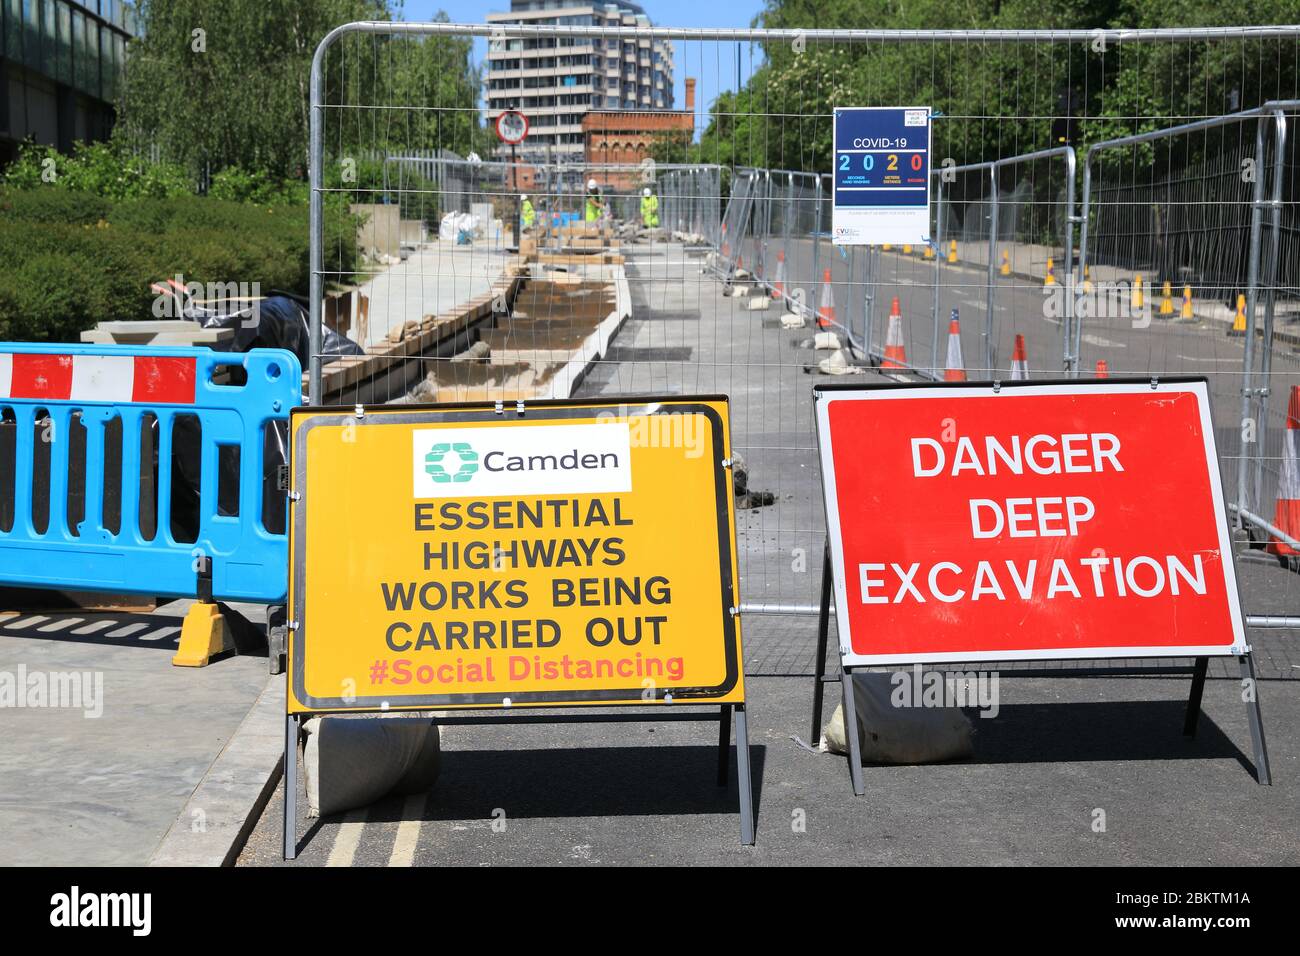 Social distancing in Camden Council essential road works, in the coronavirus pandemic, in London, UK Stock Photo